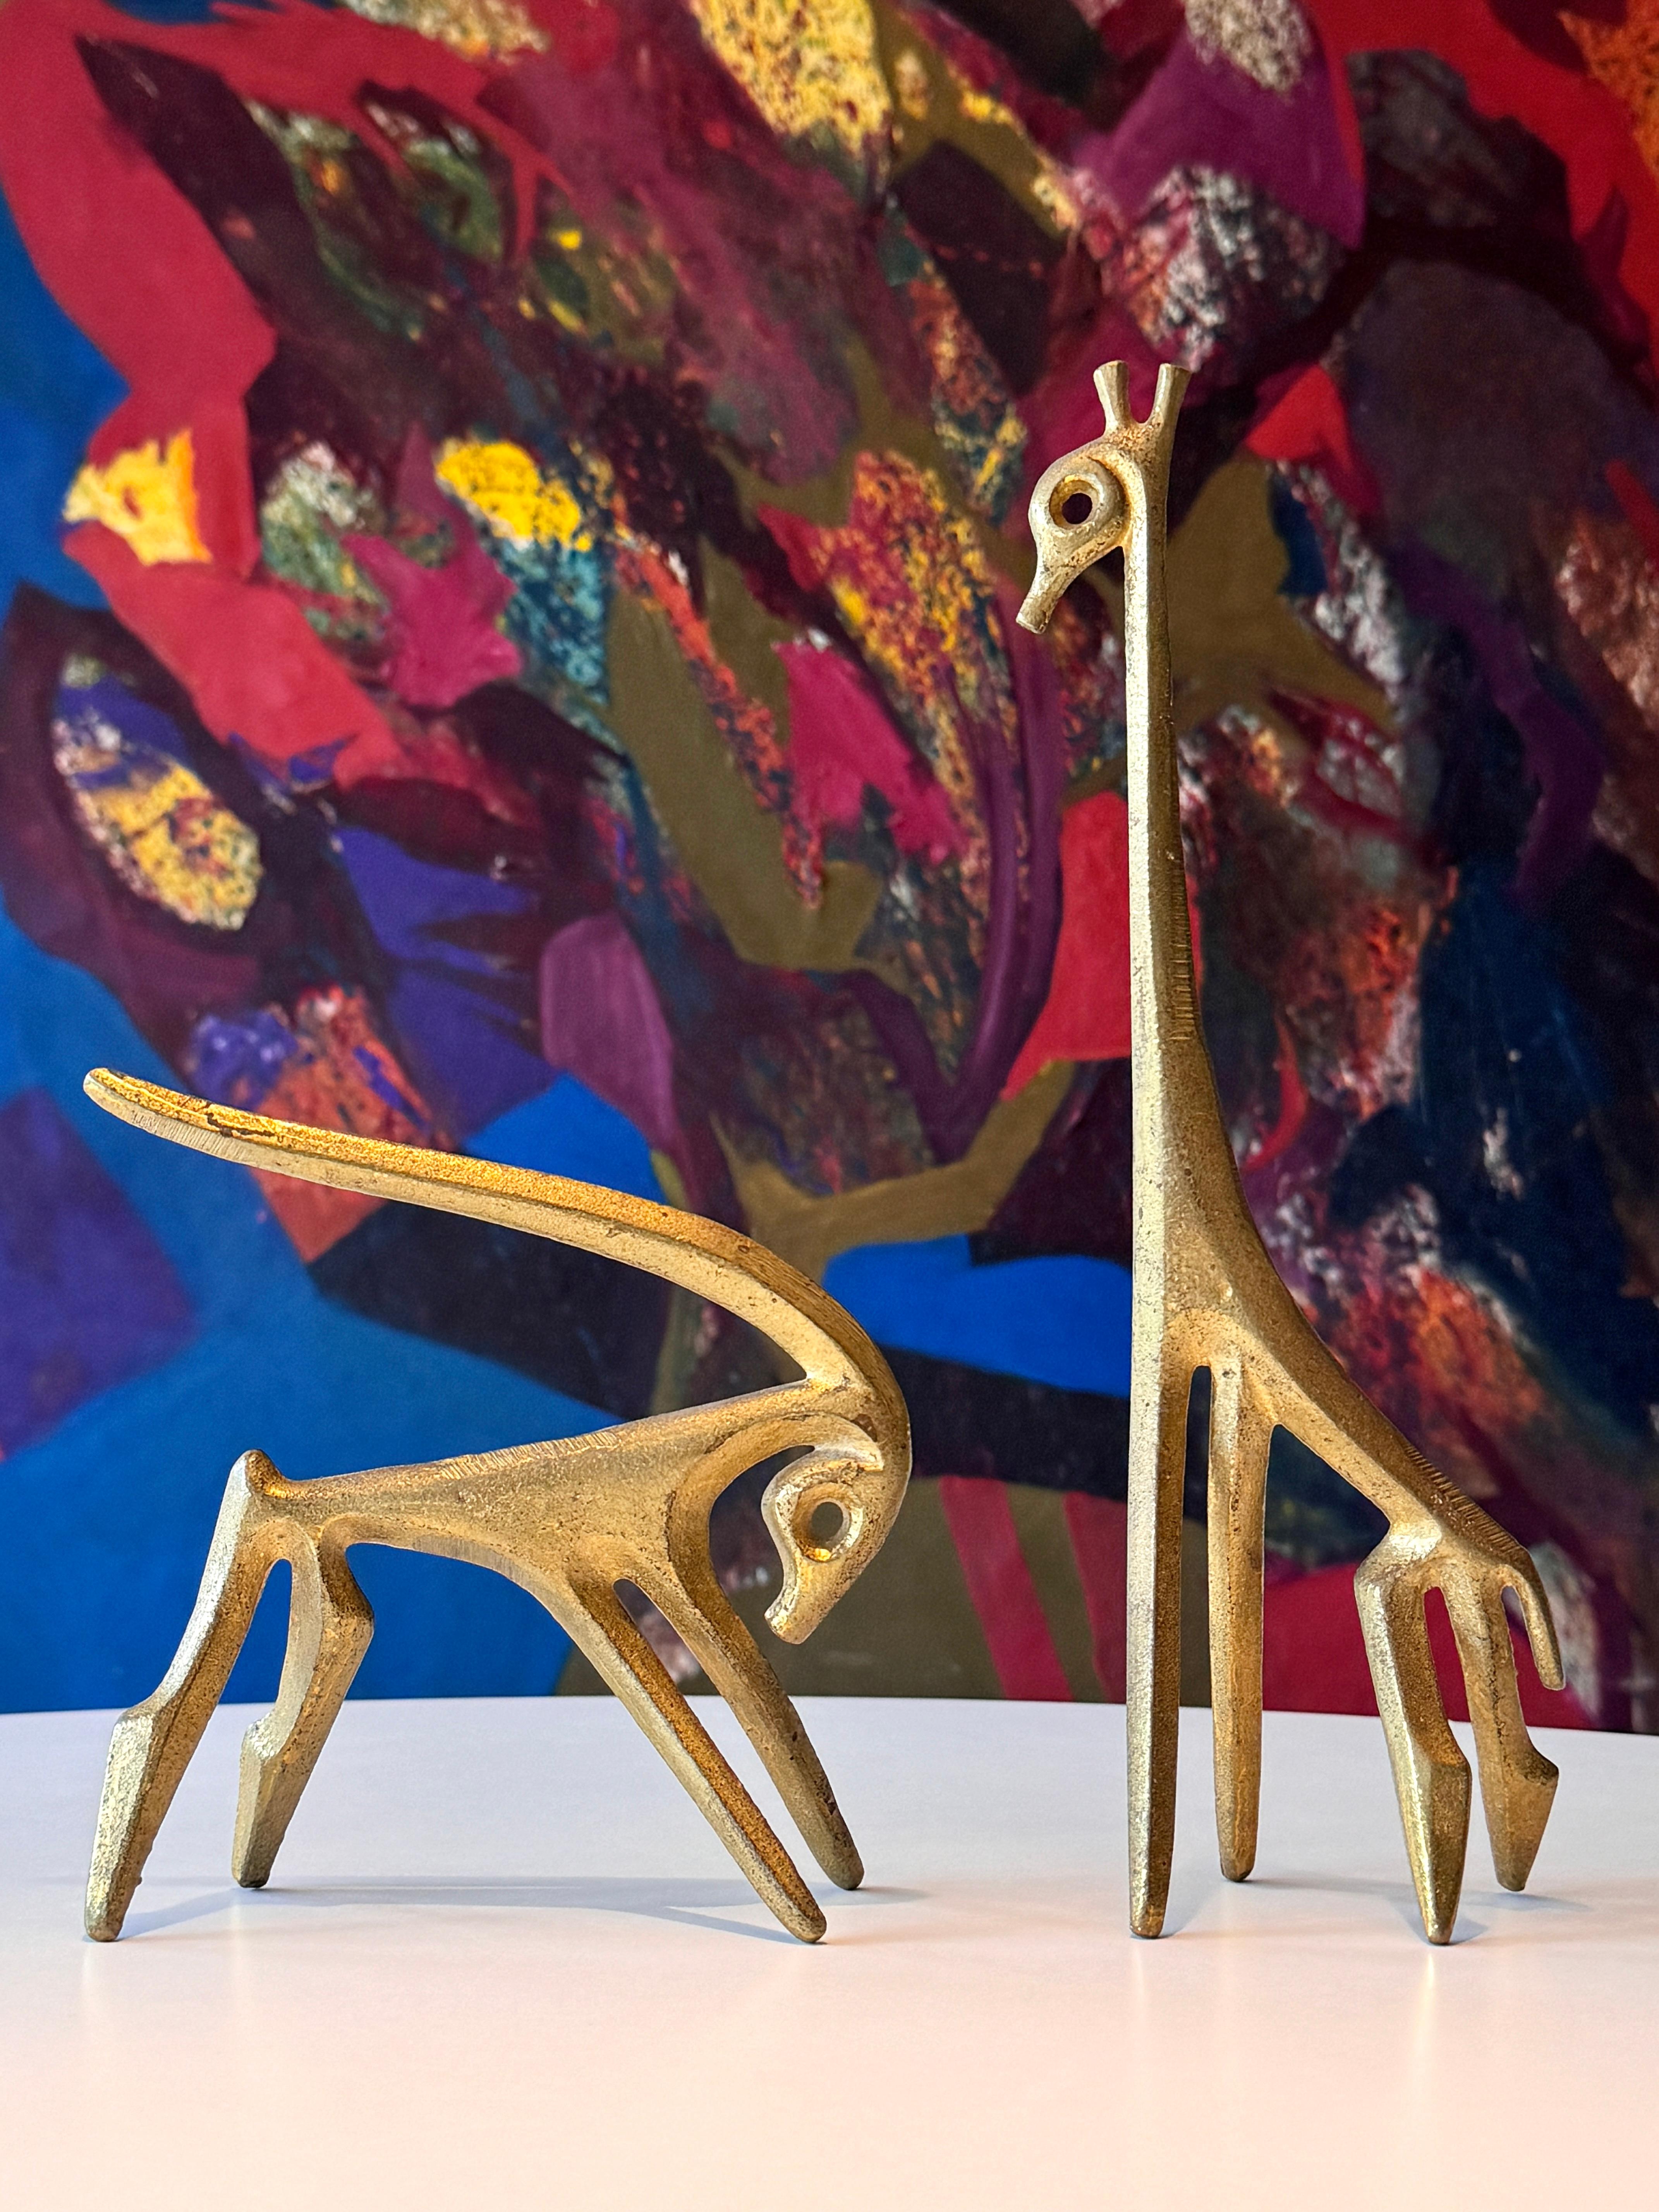 A pair of modernist tables sculptures by Frederic Weinberg circa 1950s
Cast bronze giraffe and gazelle
Both signed to leg interior

giraffe
3.5 x 3 x 11.5 inches

gazelle
6 x 2.5 x 6 inches